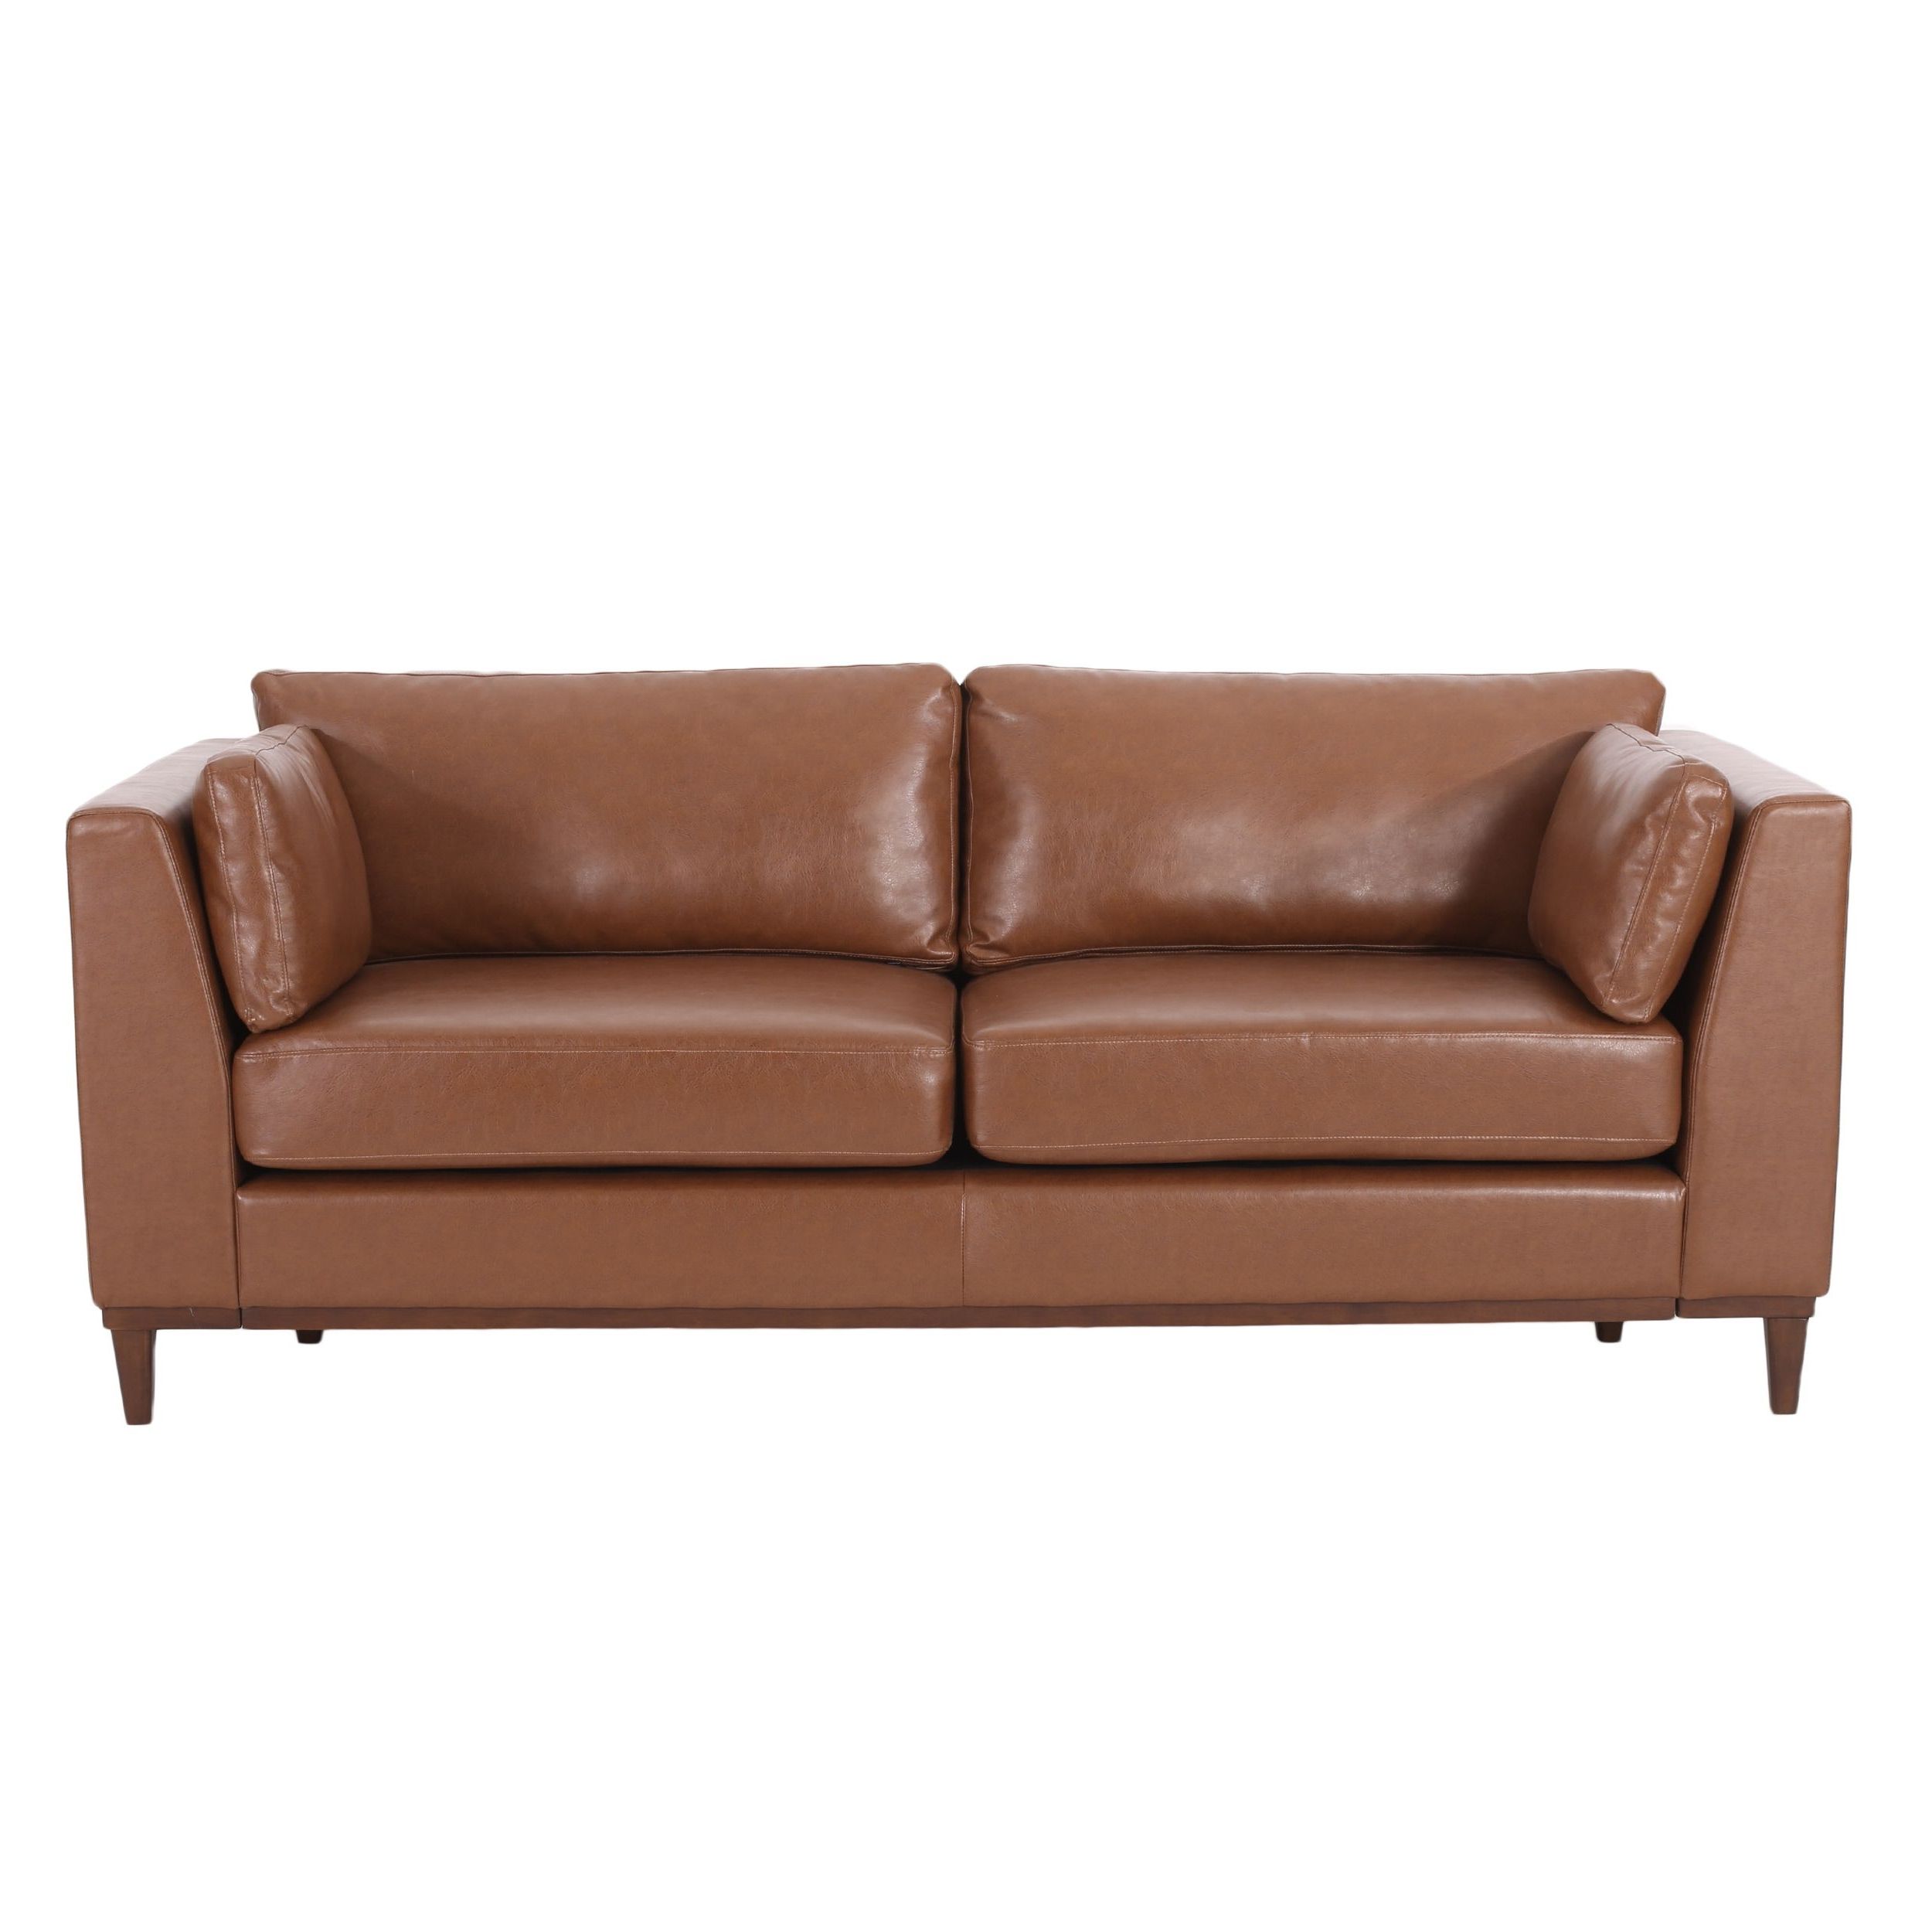 Warbler Faux Leather 3 Seater Sofachristopher Knight Home – On Sale With Regard To Most Recently Released Traditional 3 Seater Faux Leather Sofas (Photo 14 of 15)